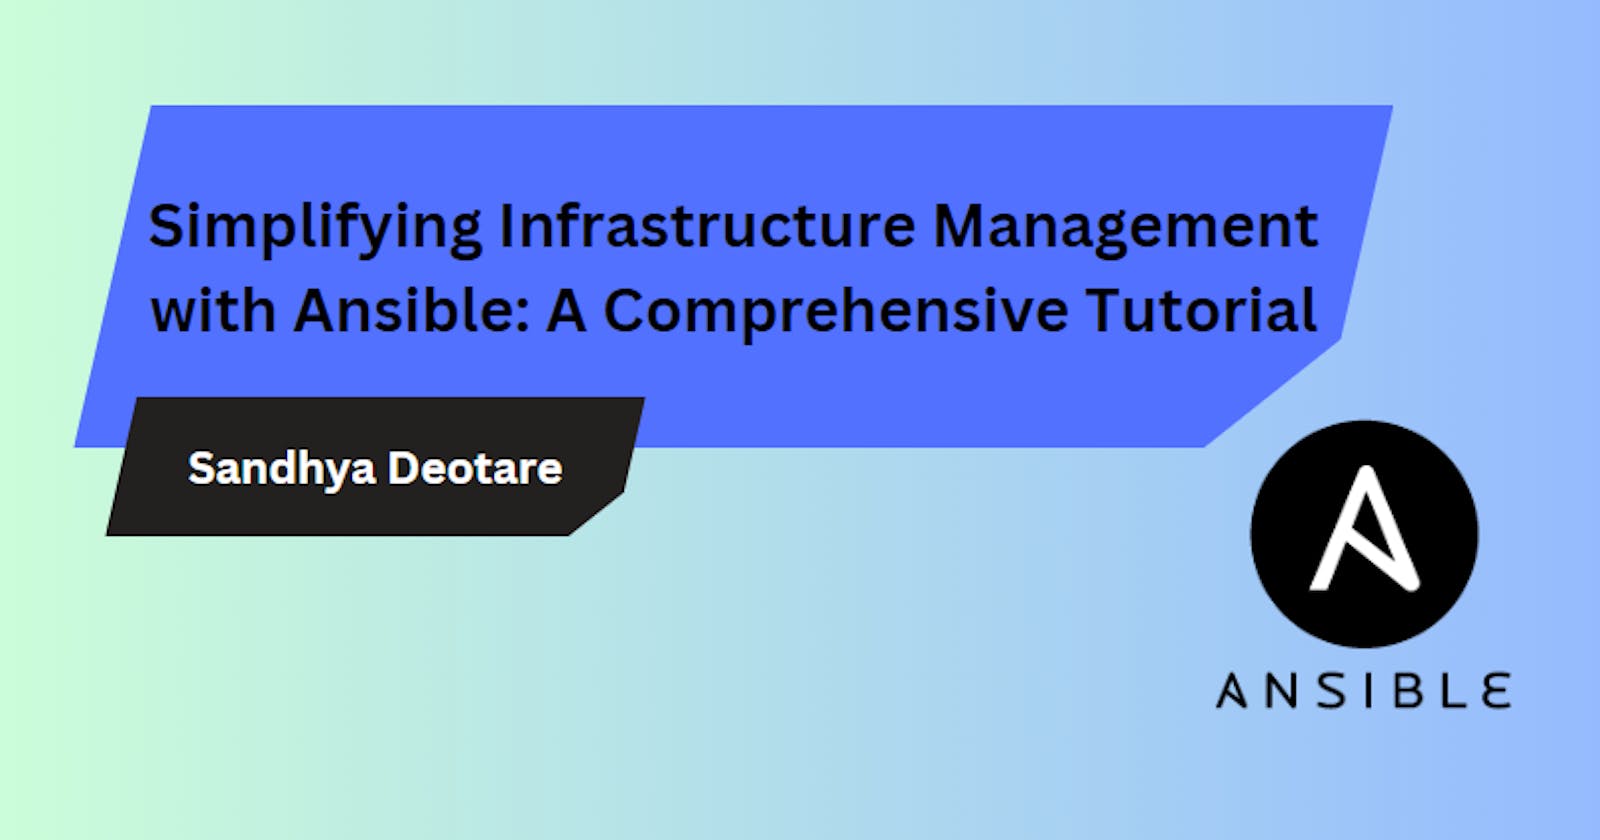 Simplifying Infrastructure Management with Ansible: A Comprehensive Tutorial